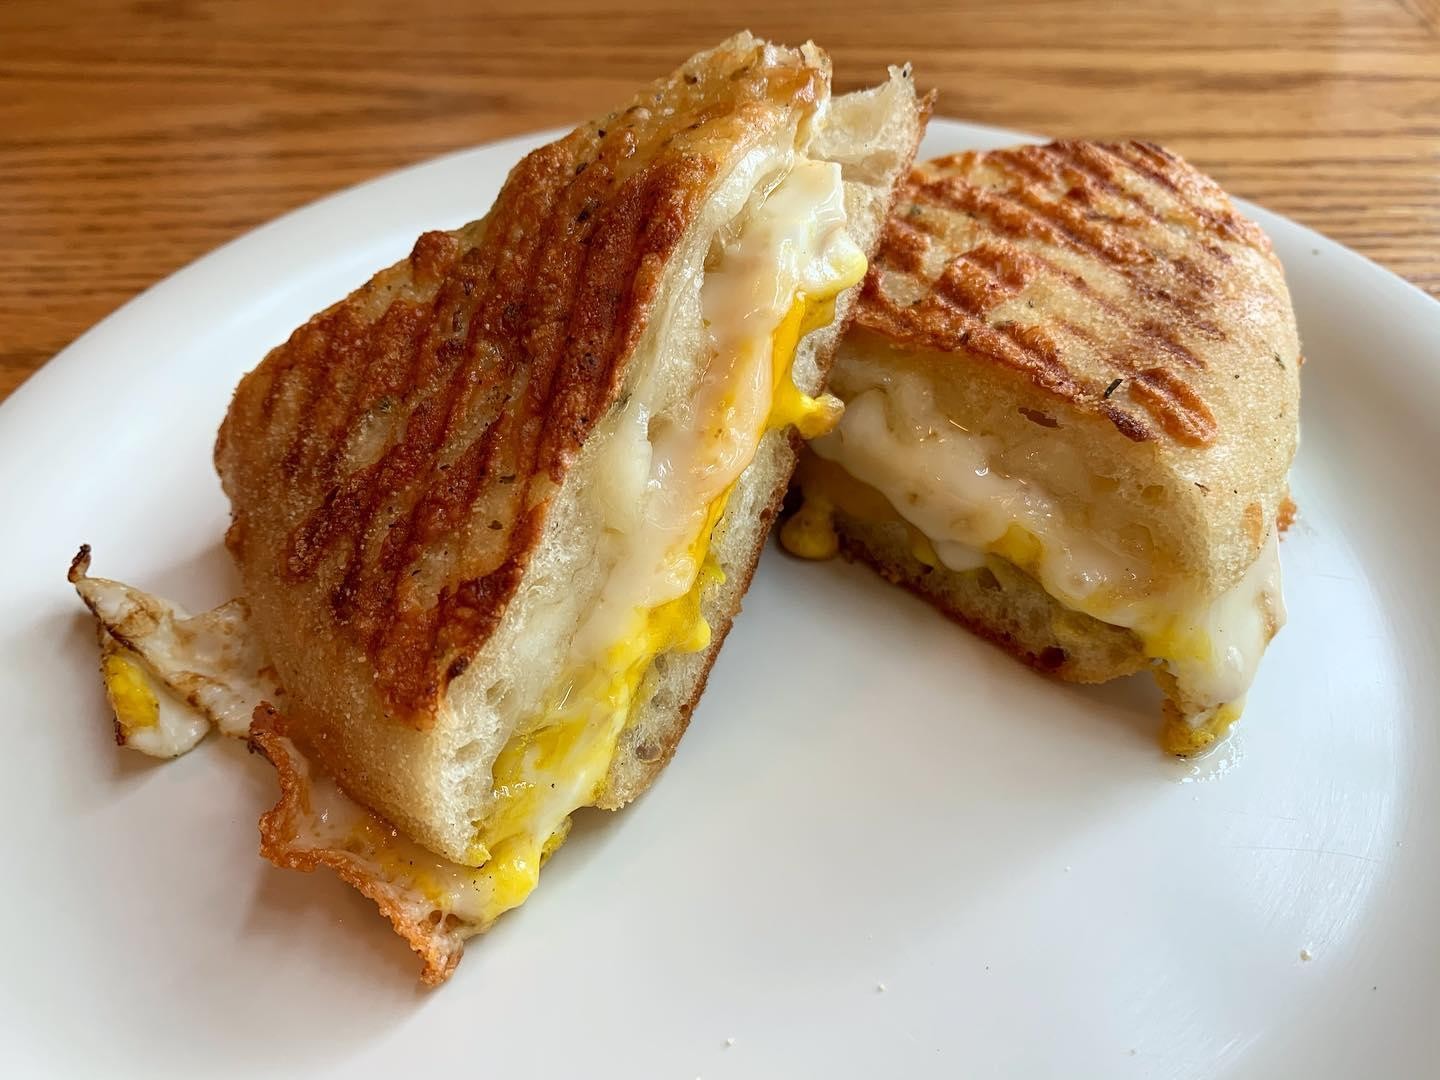 SPECIAL: The Mabel Egg Sandwich